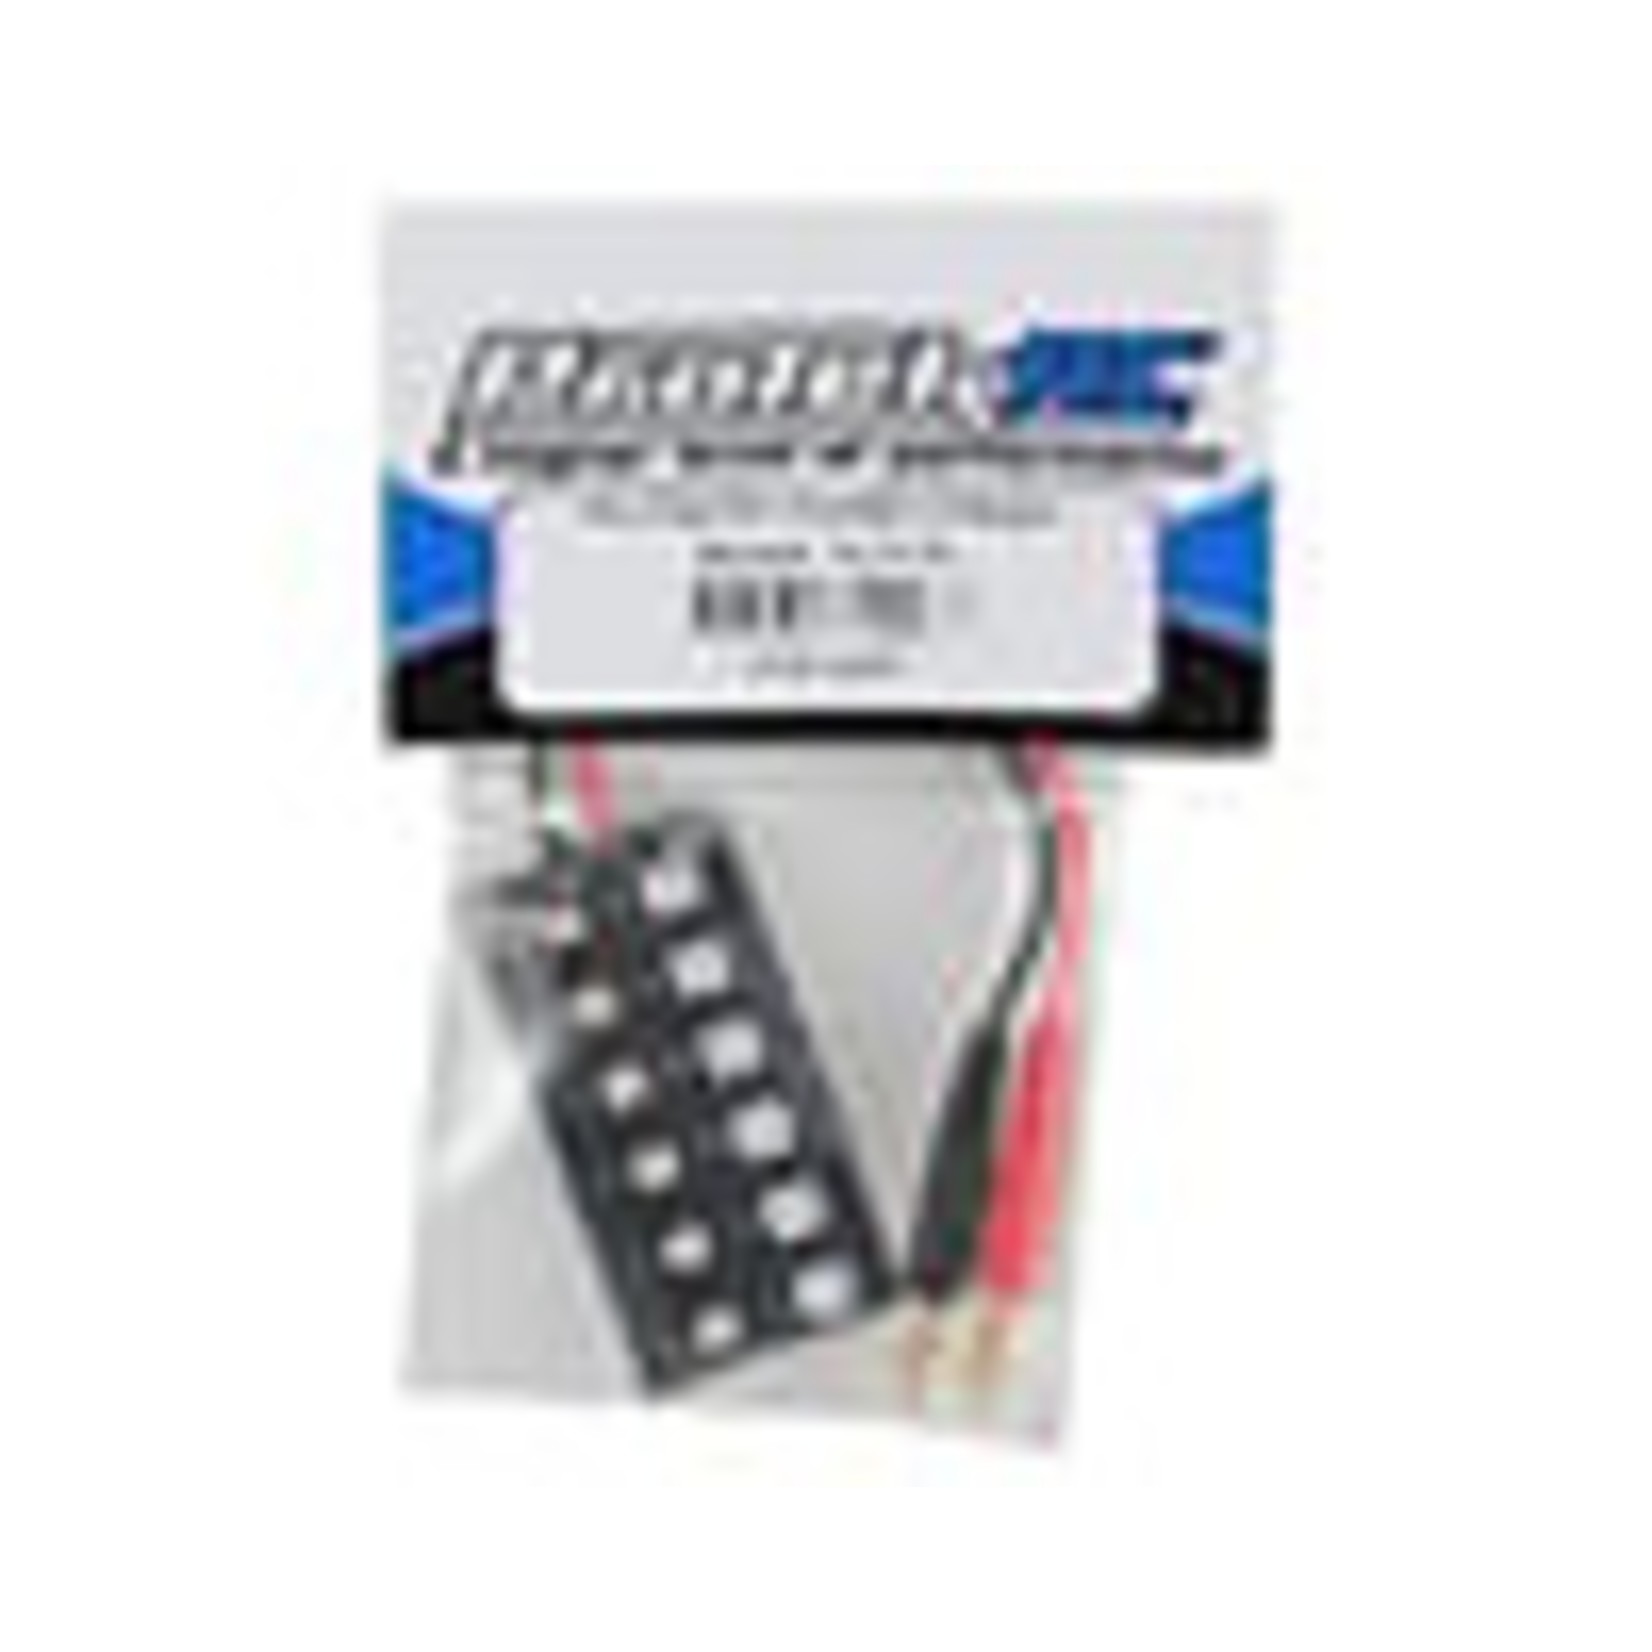 Protek RC PTK-5332   RC 1S 12-Battery Parallel Charger Board (Ultra Micro/JST-PH)